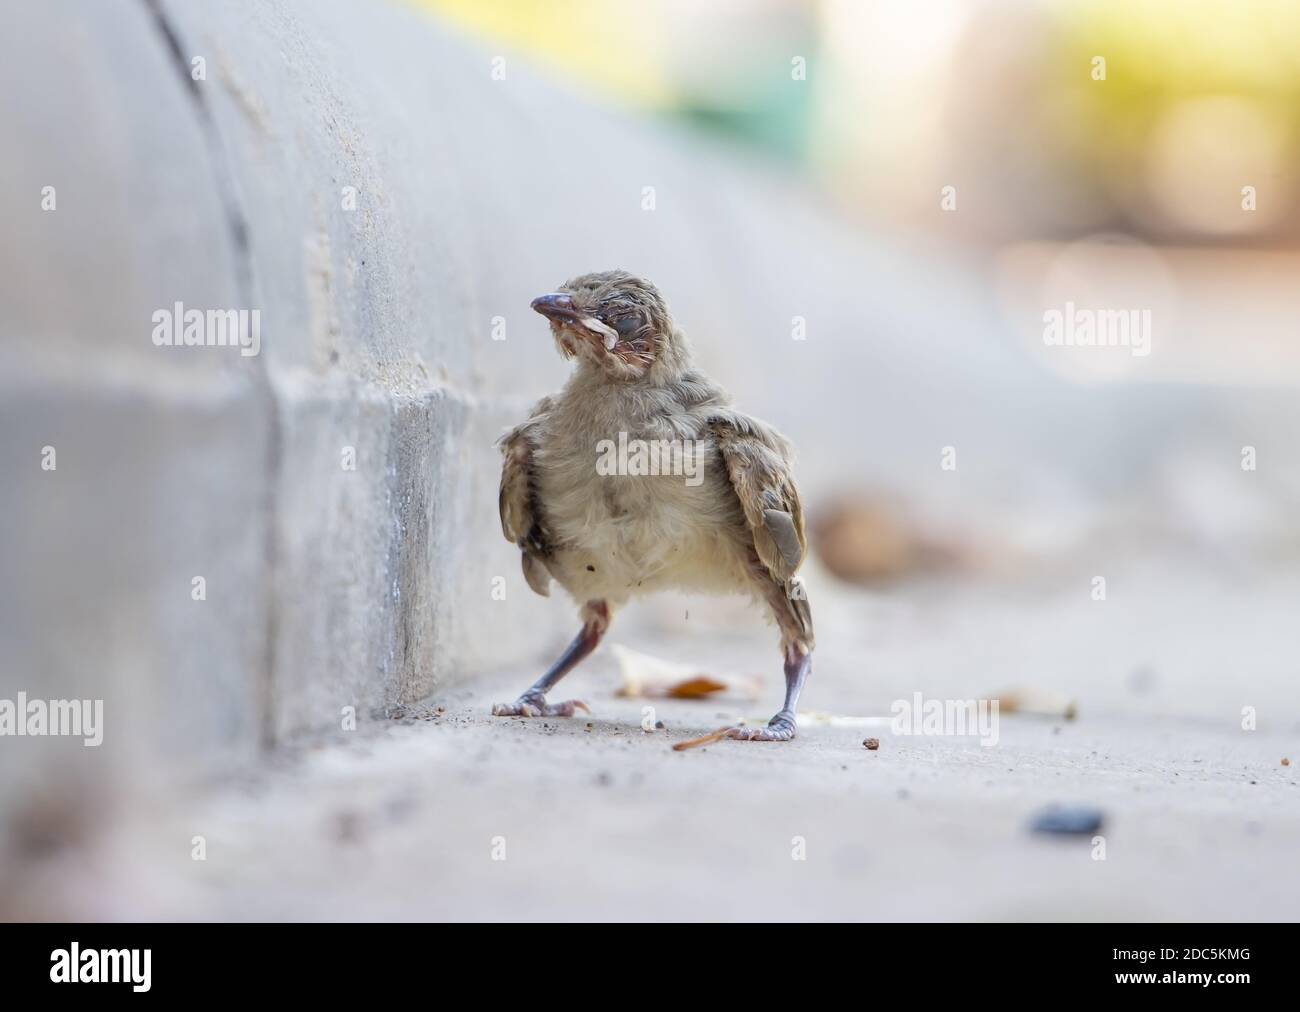 A small blind baby bird on the street. A newborn bird fell out of a nest on a tree on the road. Stock Photo